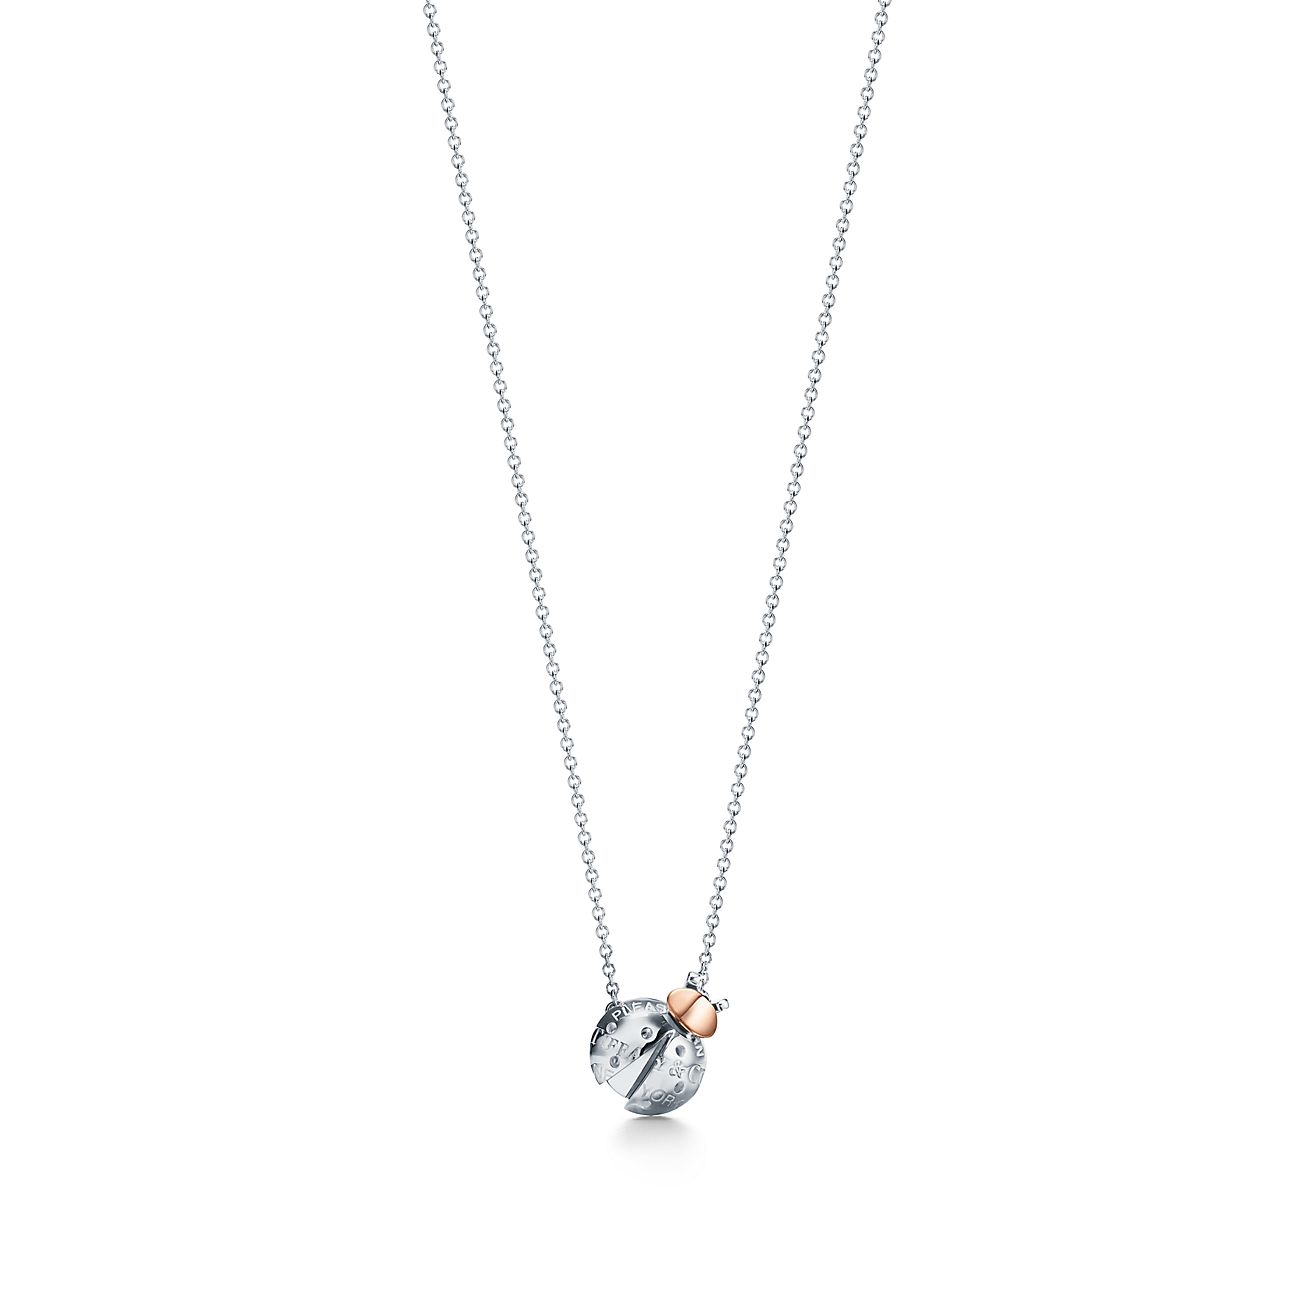 Return to Tiffany® Love Bugs ladybug pendant in sterling silver and rose  gold. | Tiffany & Co.